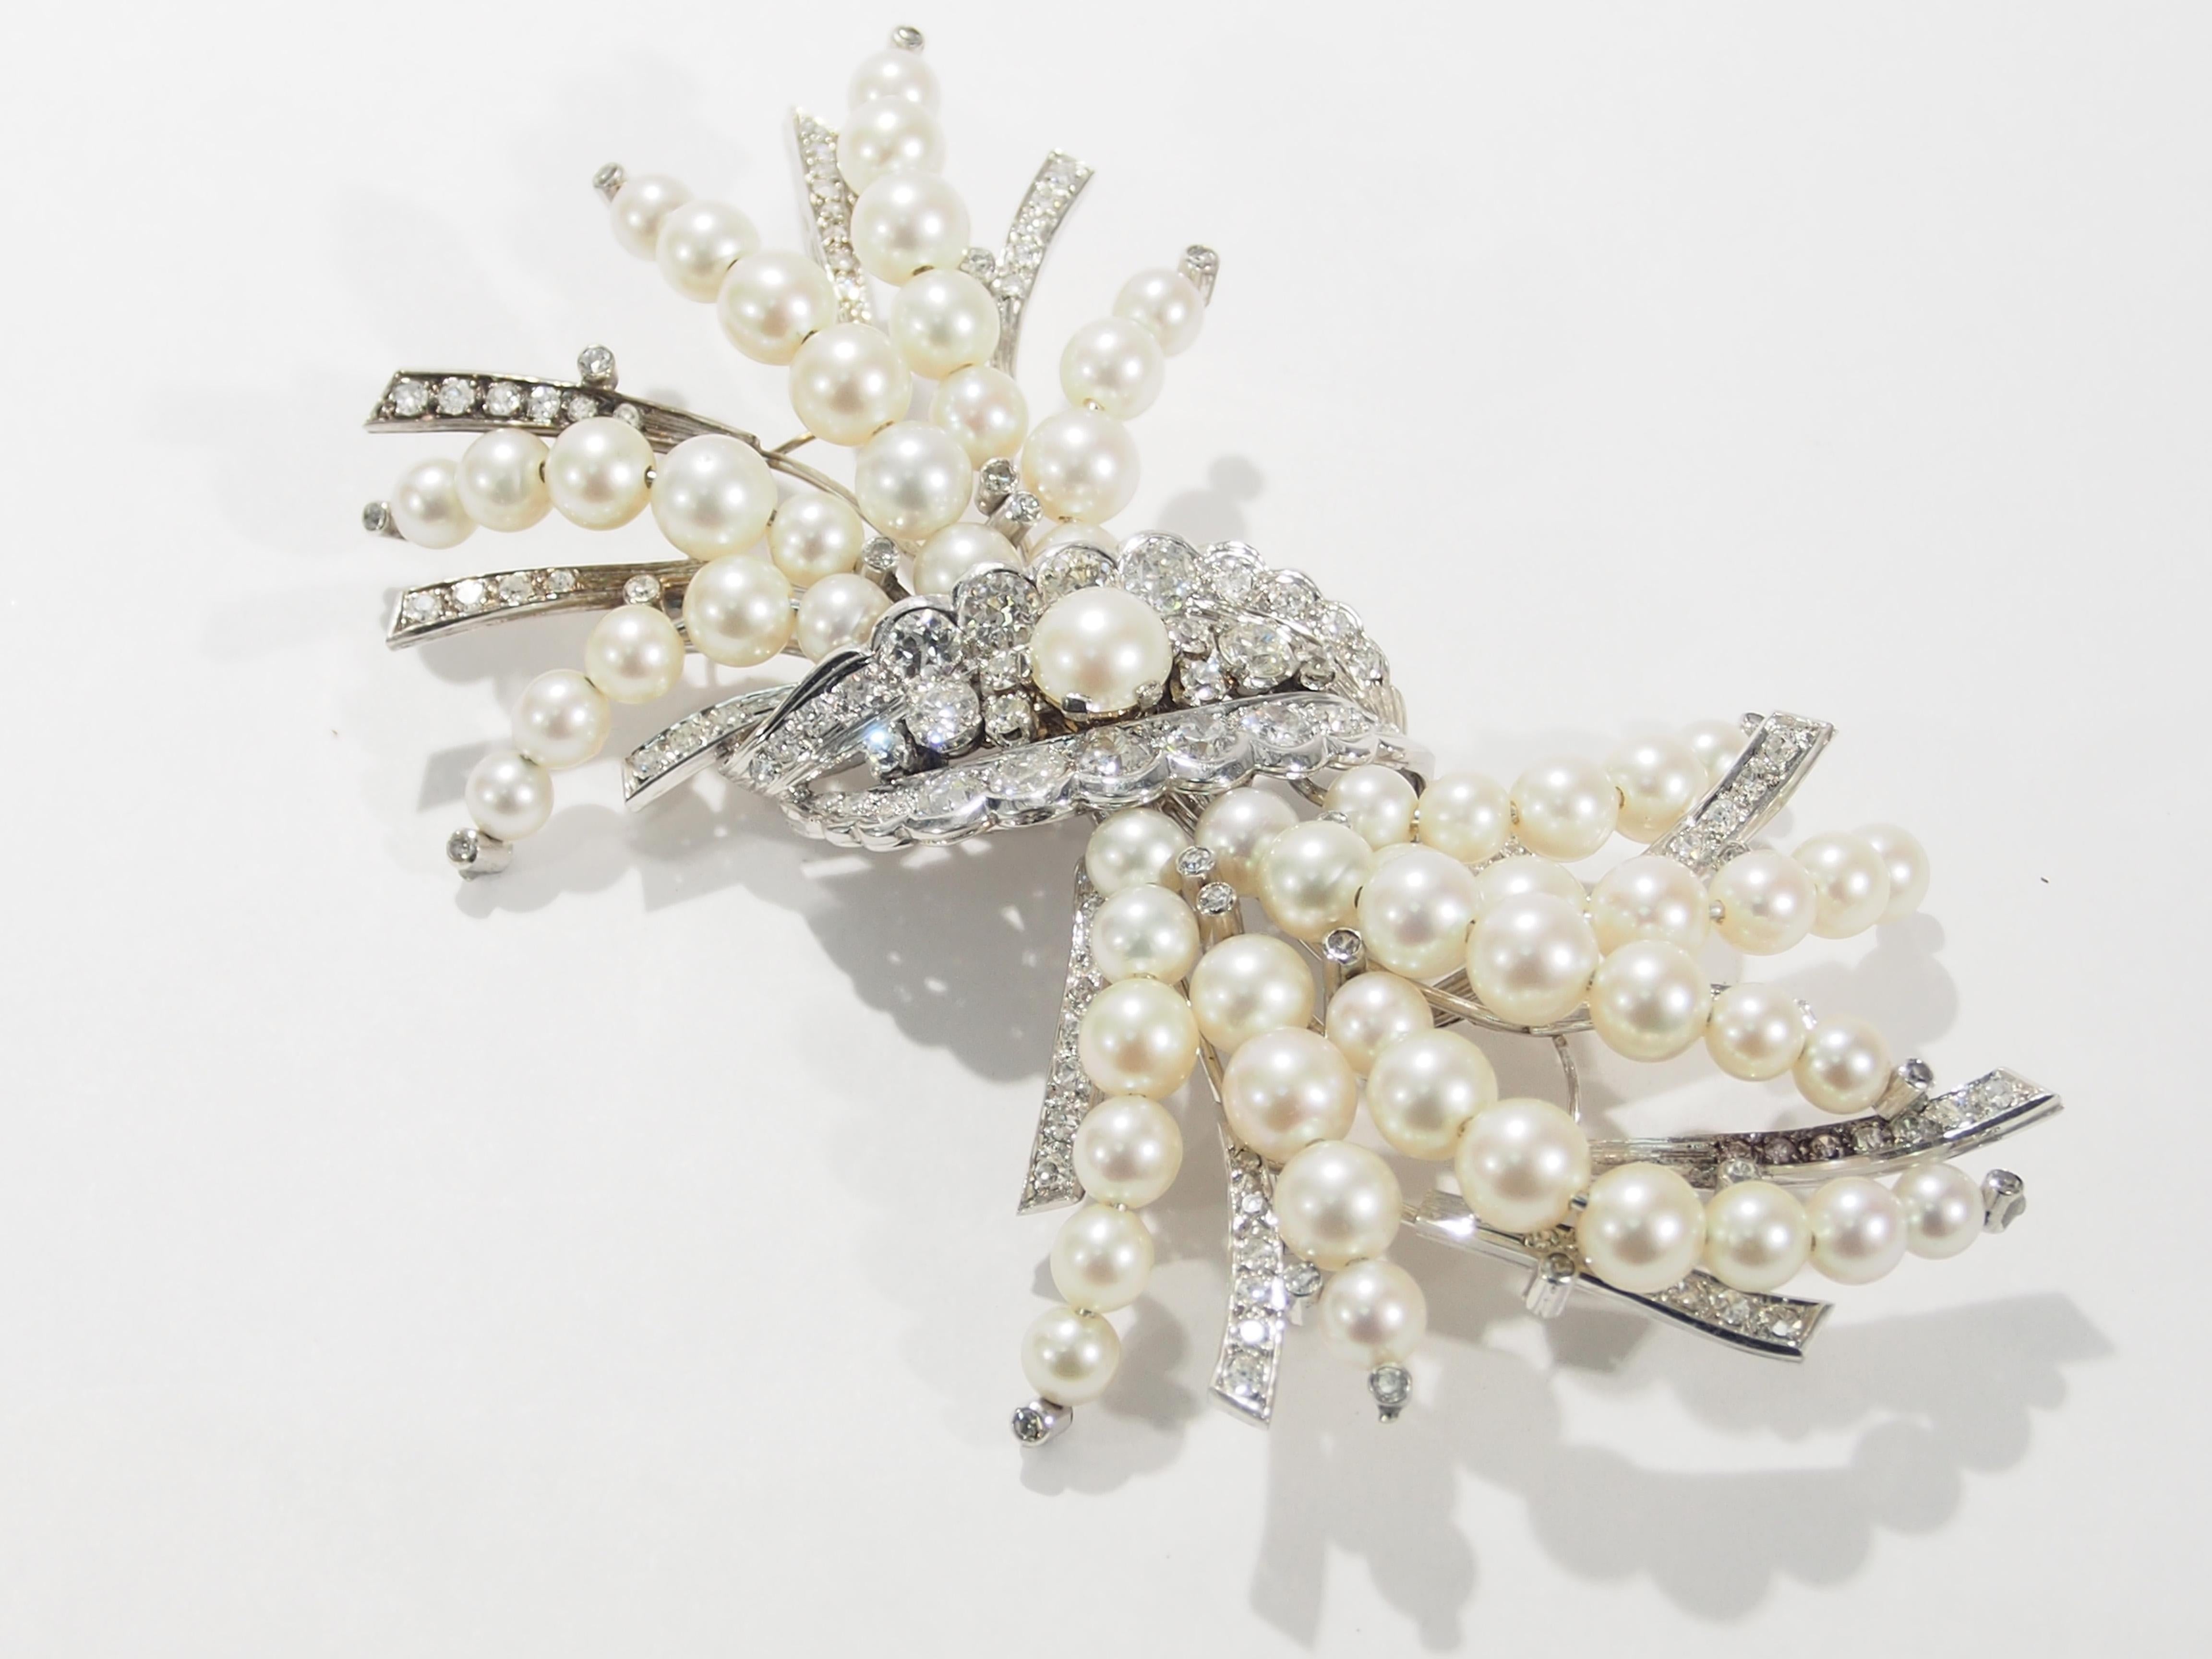 This is a stunning 14K White Gold Brooch containing Diamonds and Pearls. A fascinating Brooch from the Edwardian Period that is designed as a spray of flowers formed by Pearls and Diamonds in a 4 inch length by 2 inch width. There are 126 Old